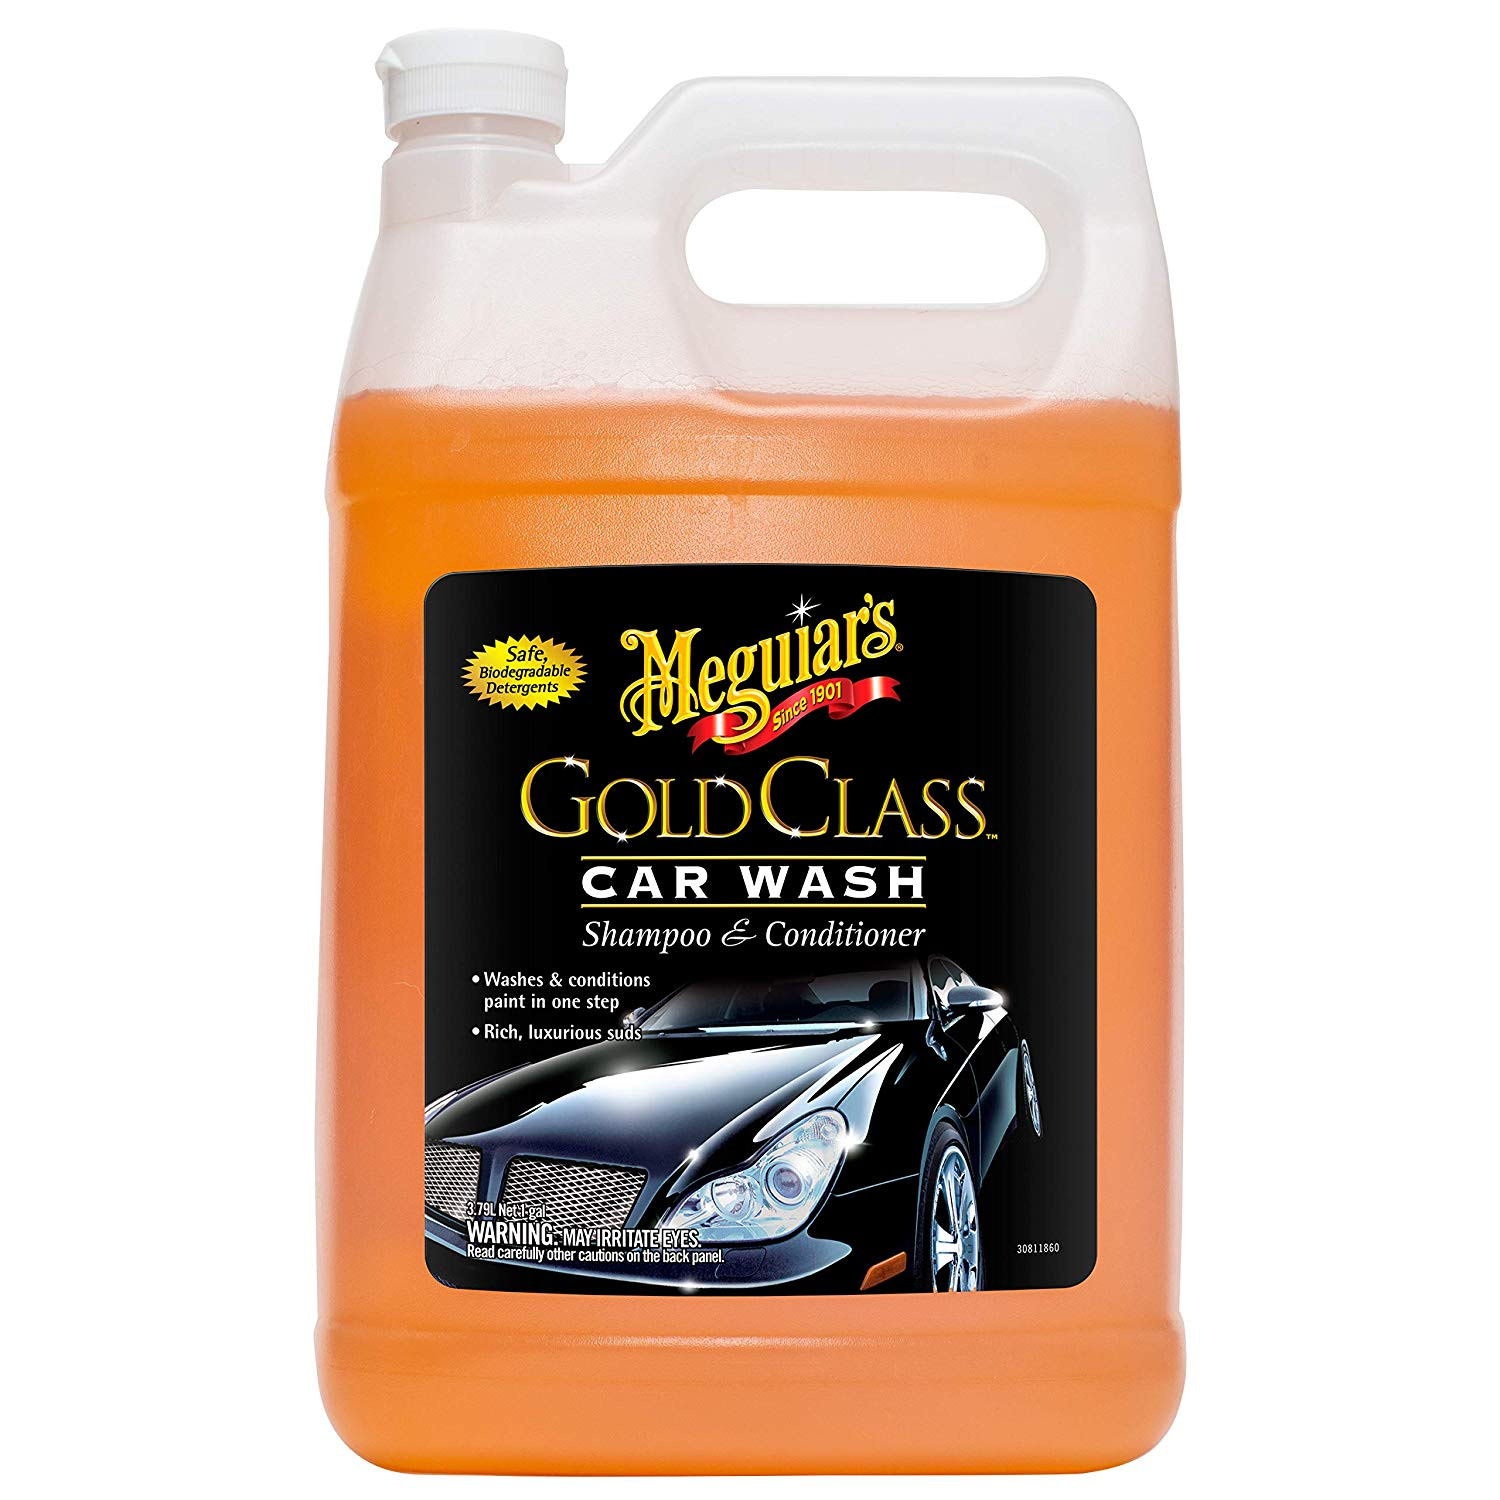 Meguiar's - How do you use Gold Class Car Wash Shampoo & Conditioner? In a  bucket or in a foam cannon? #carwash #goldclass #cardetailing #detailing  #automotive #detailingworld #polishing